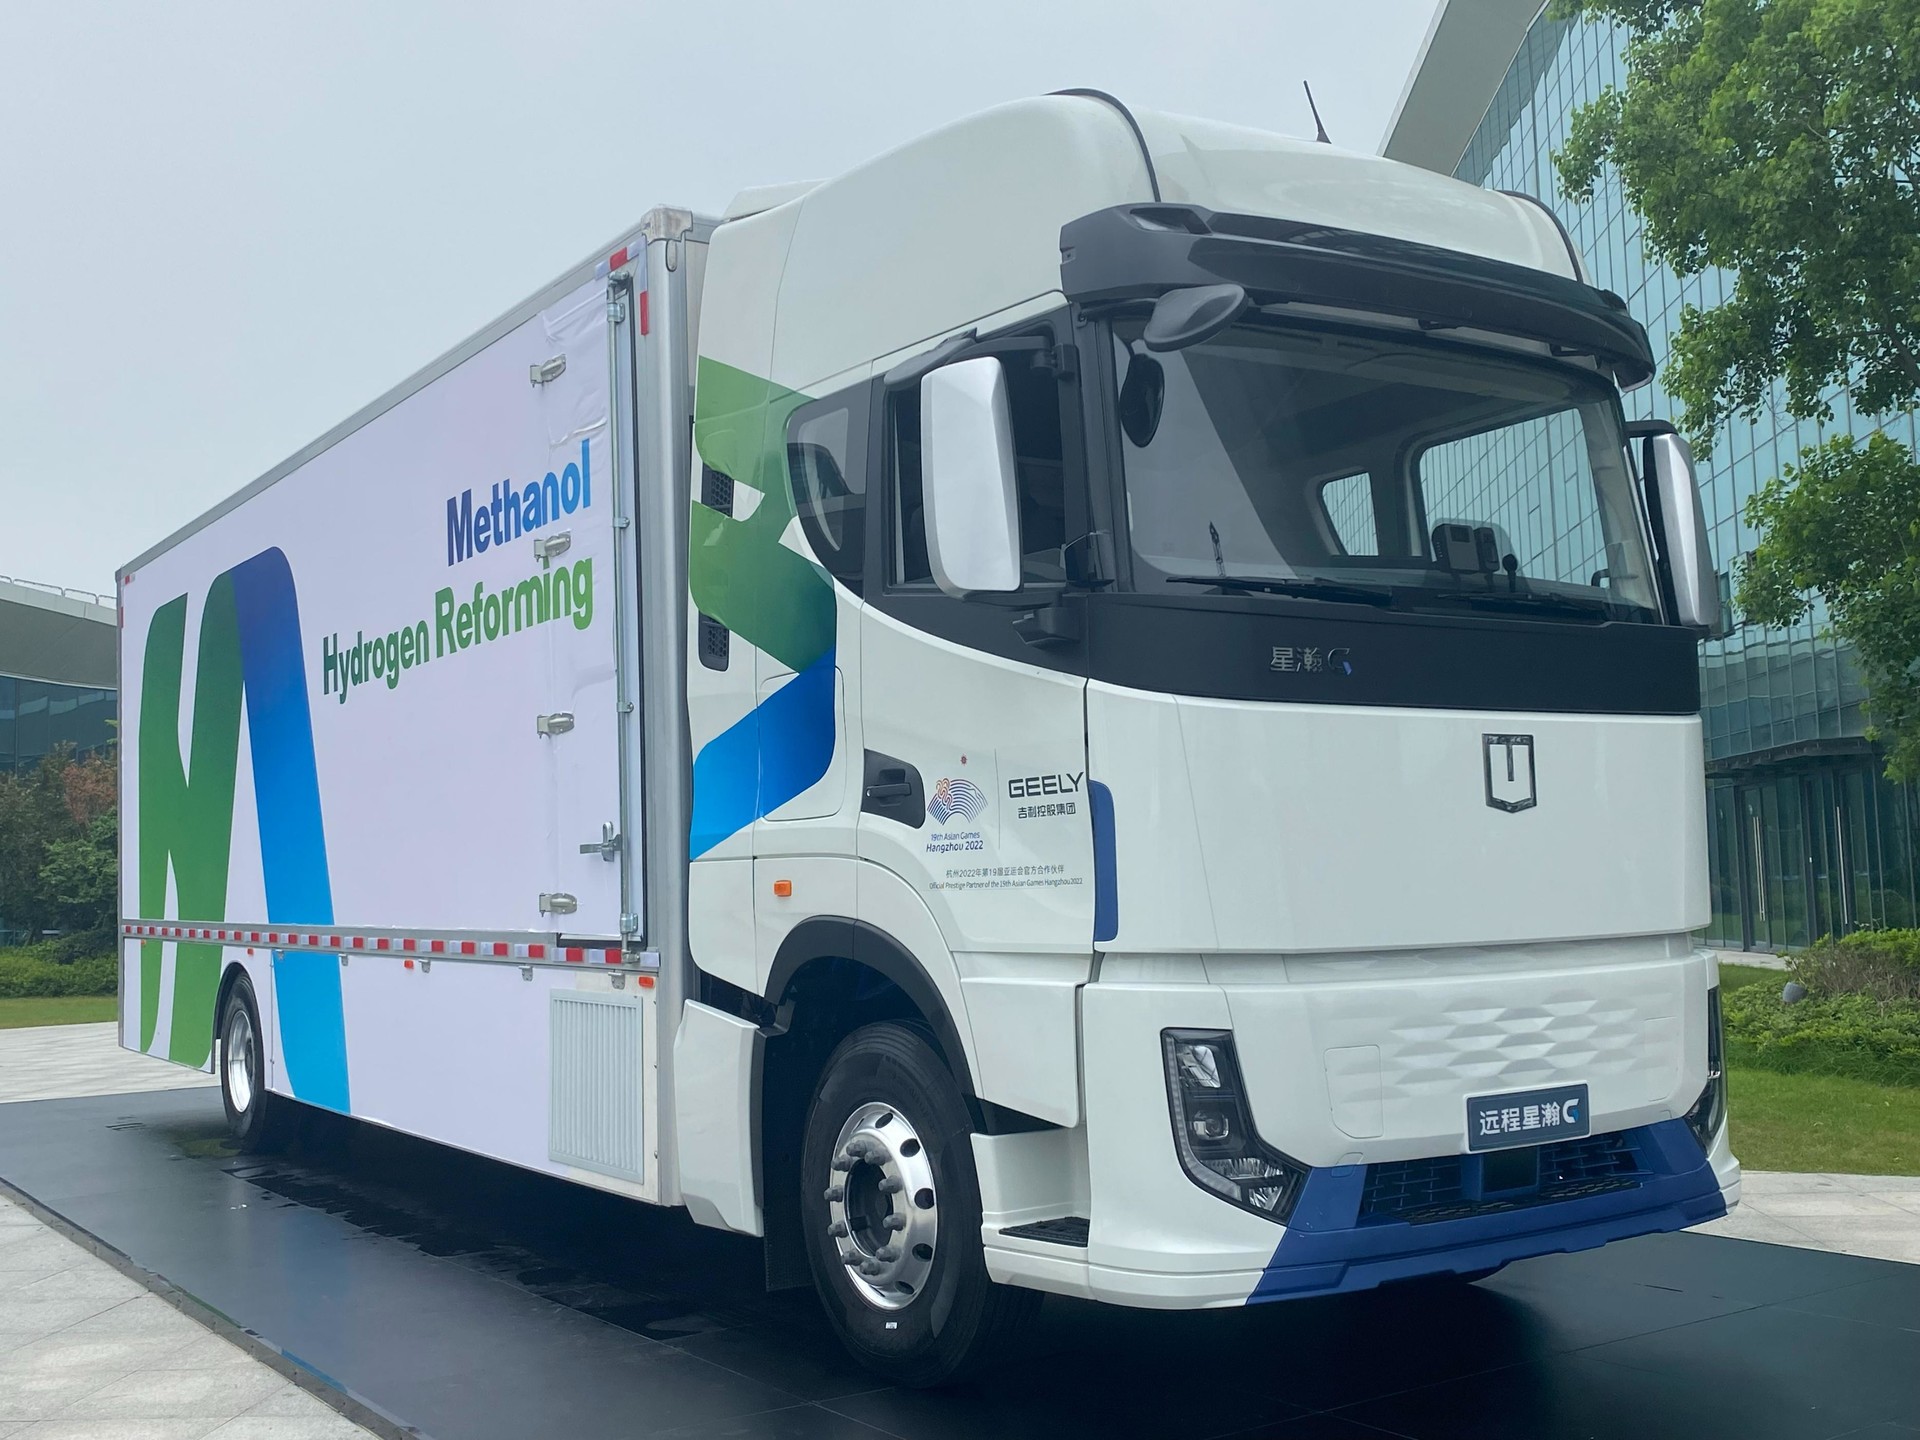 First methanol reforming to produce hydrogen cargo exposure! Remote to add another "big killer"